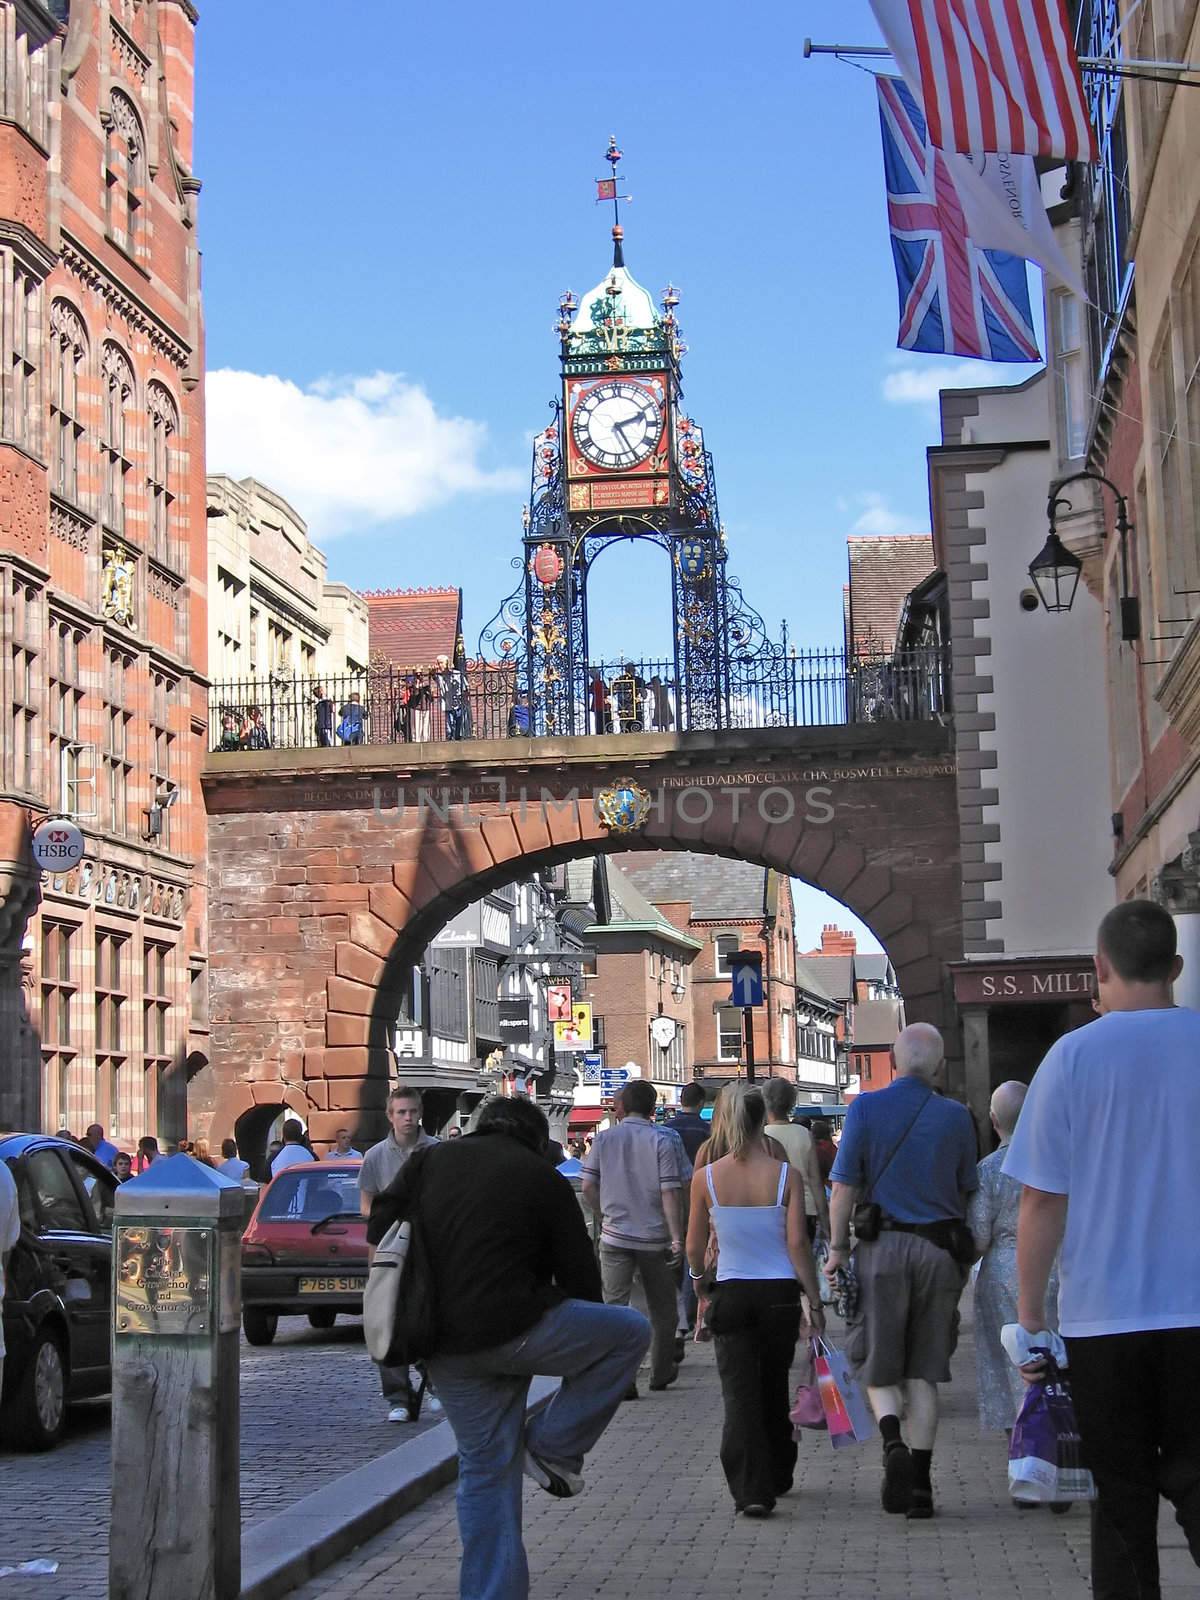 Shoppers and Tourists by the Clock in Chester